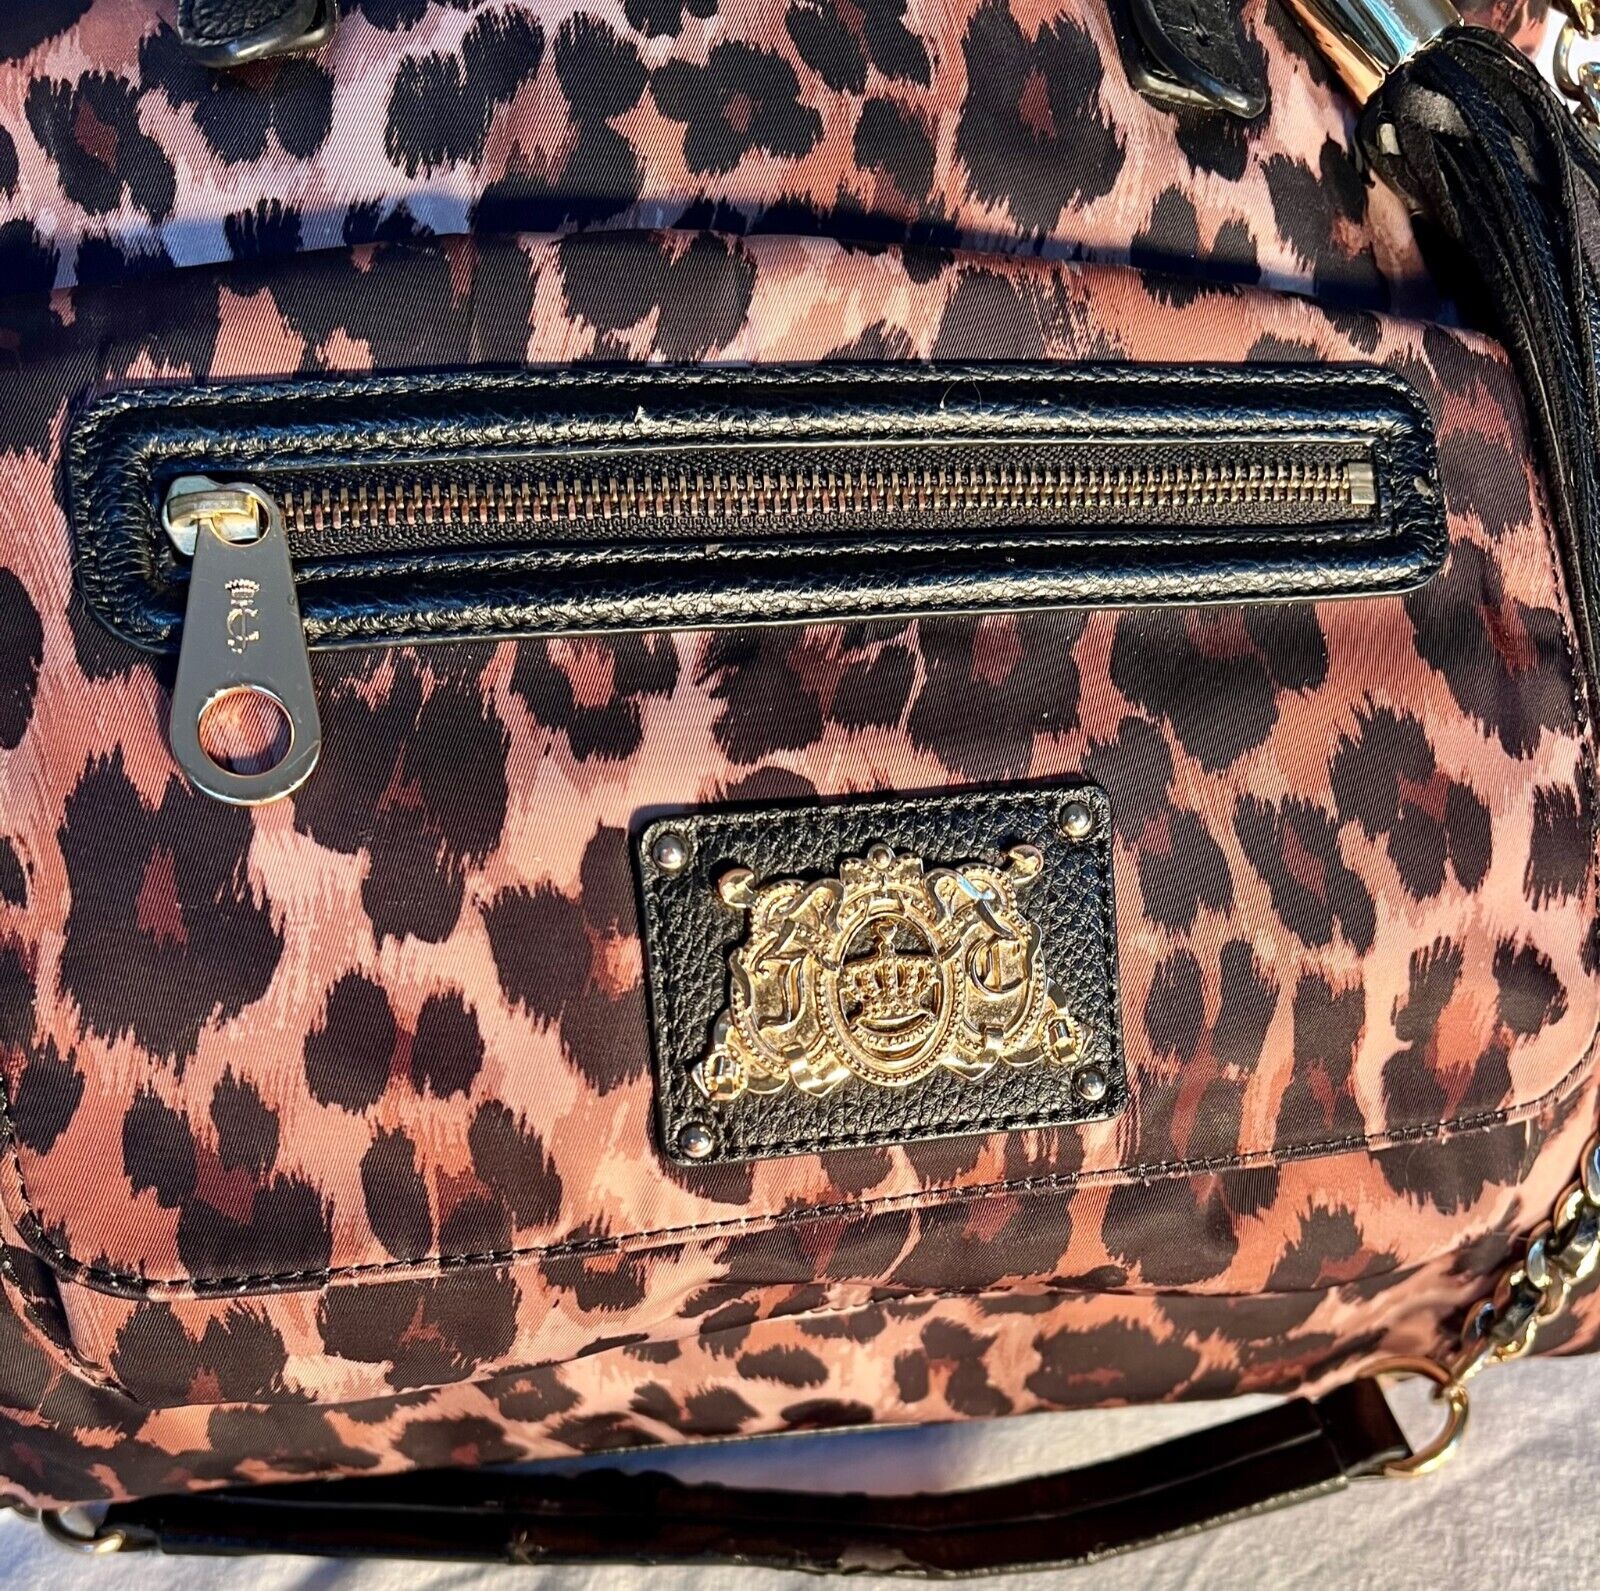 Juicy Couture Large Animal Print Purse - image 2